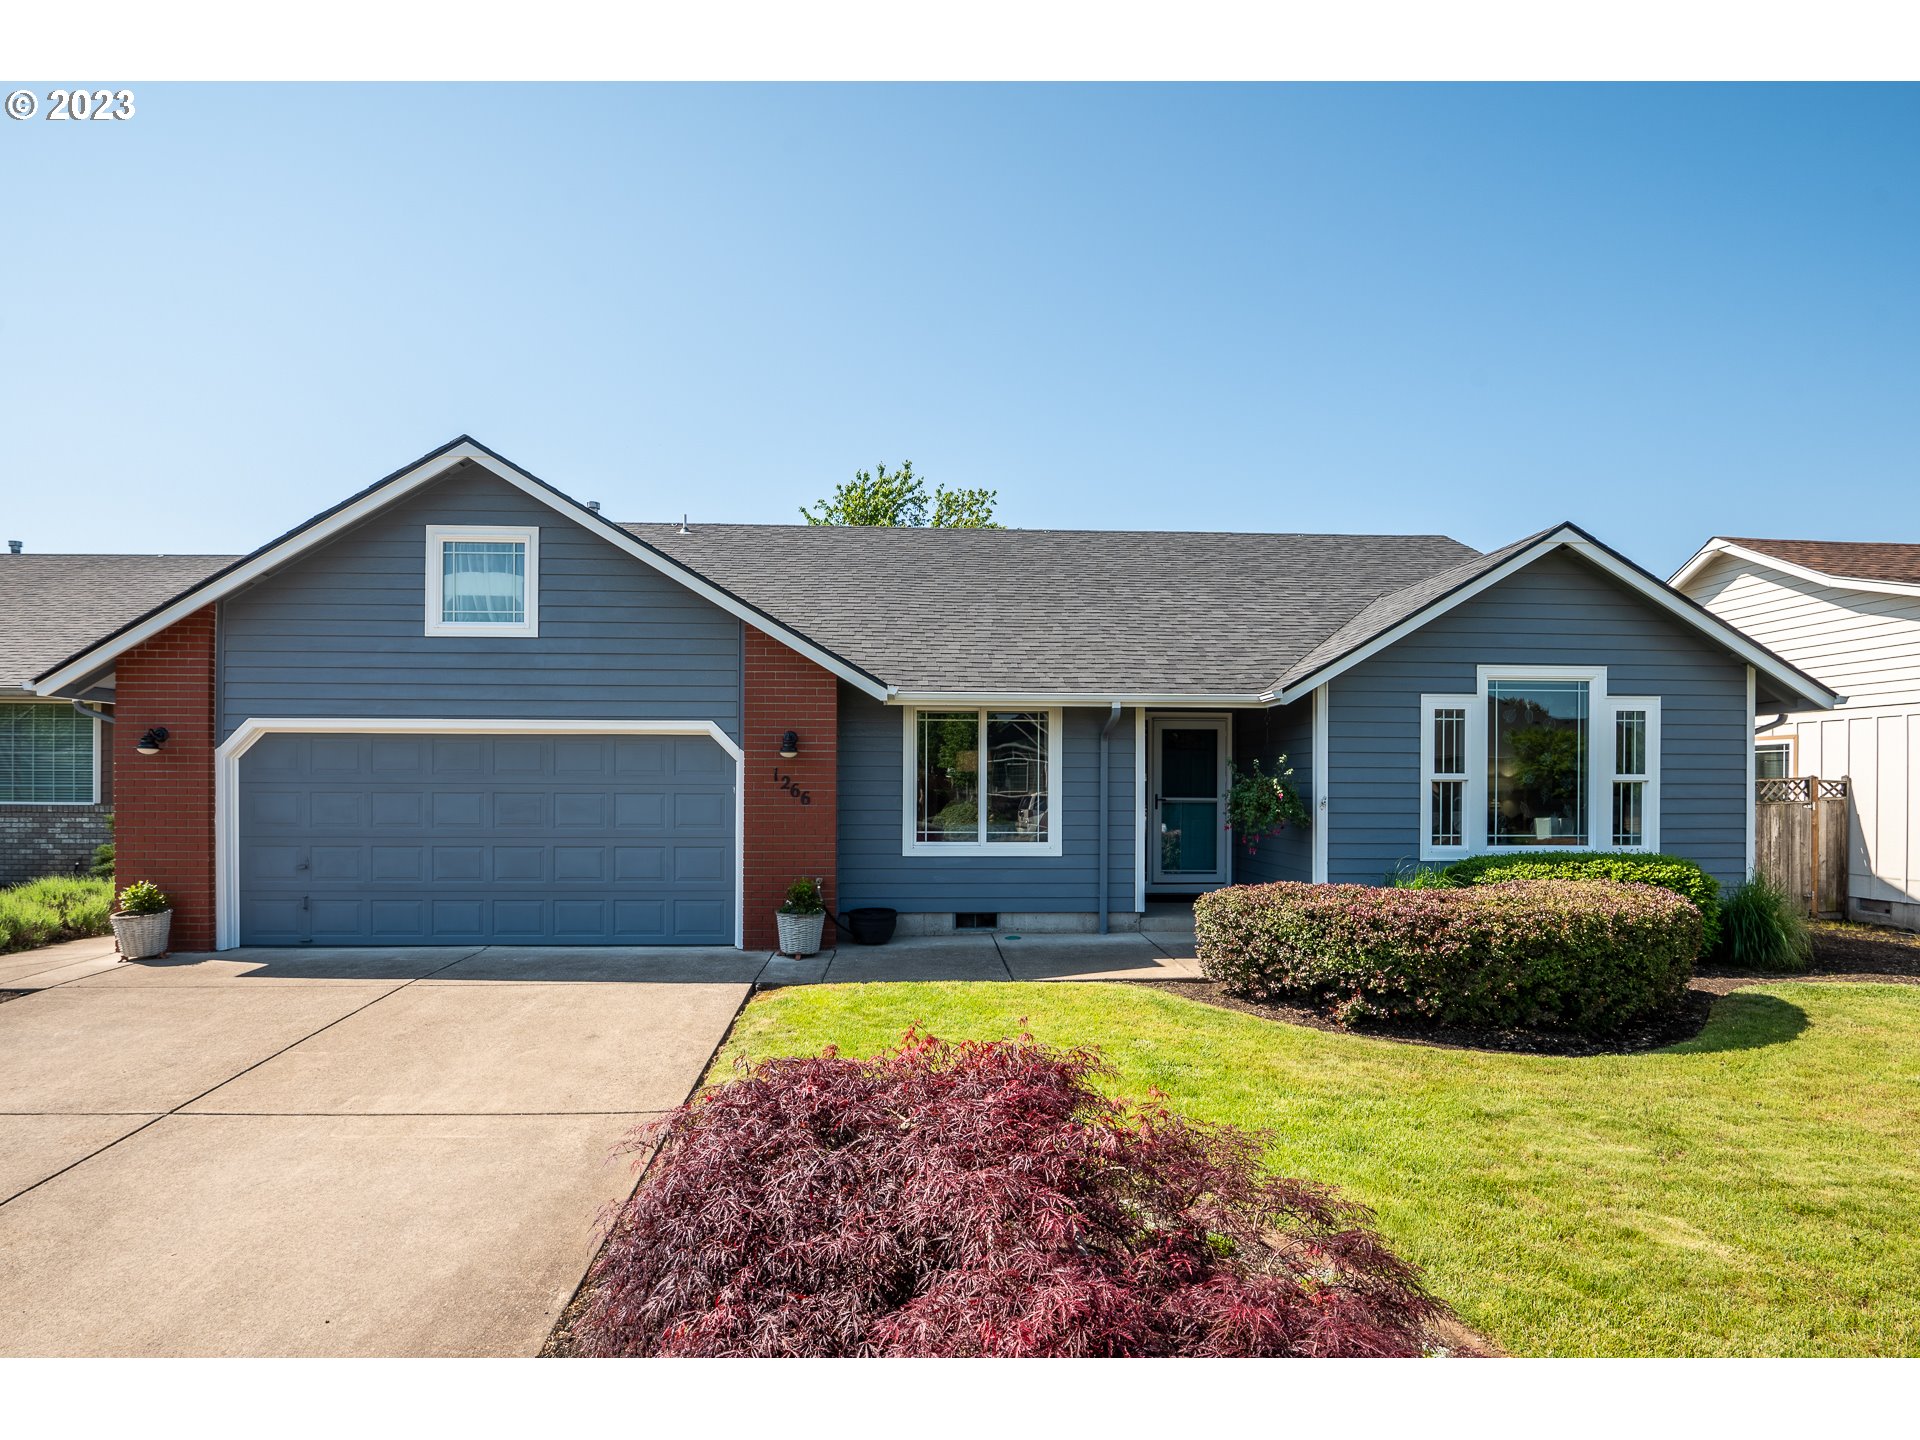 1266 WINERY LN, Eugene, OR 97404